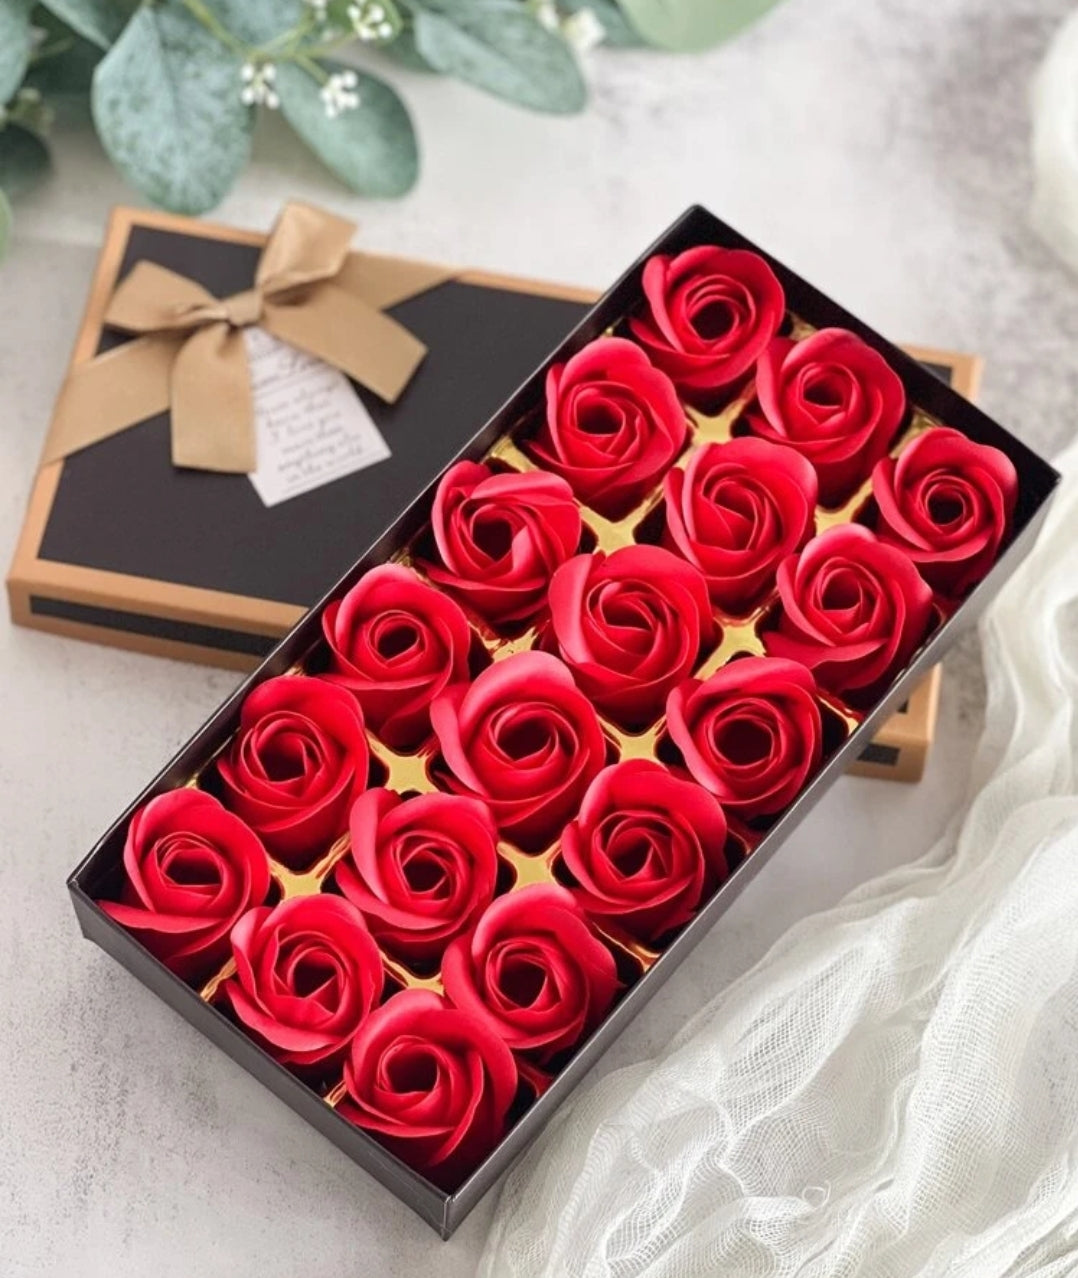 Rose Petals Soap Flowers in Box Handmade Artificial Scented Bath Soap Flora Bouquet for Wedding Birthday Party Home Decoration Valentine's Day Red